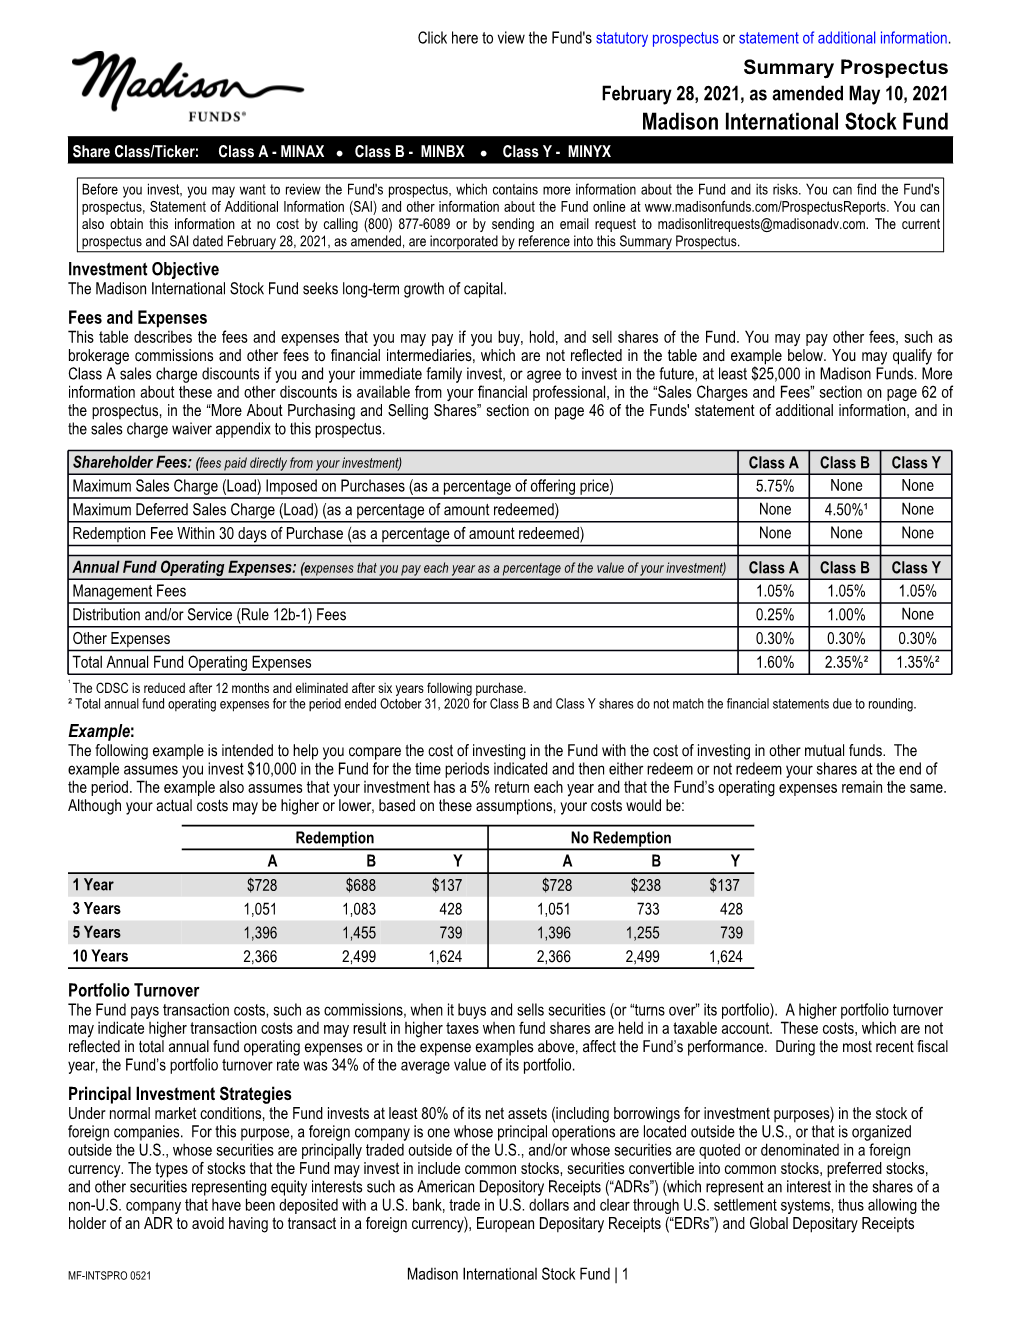 International Stock Fund Amended May 10, 2021